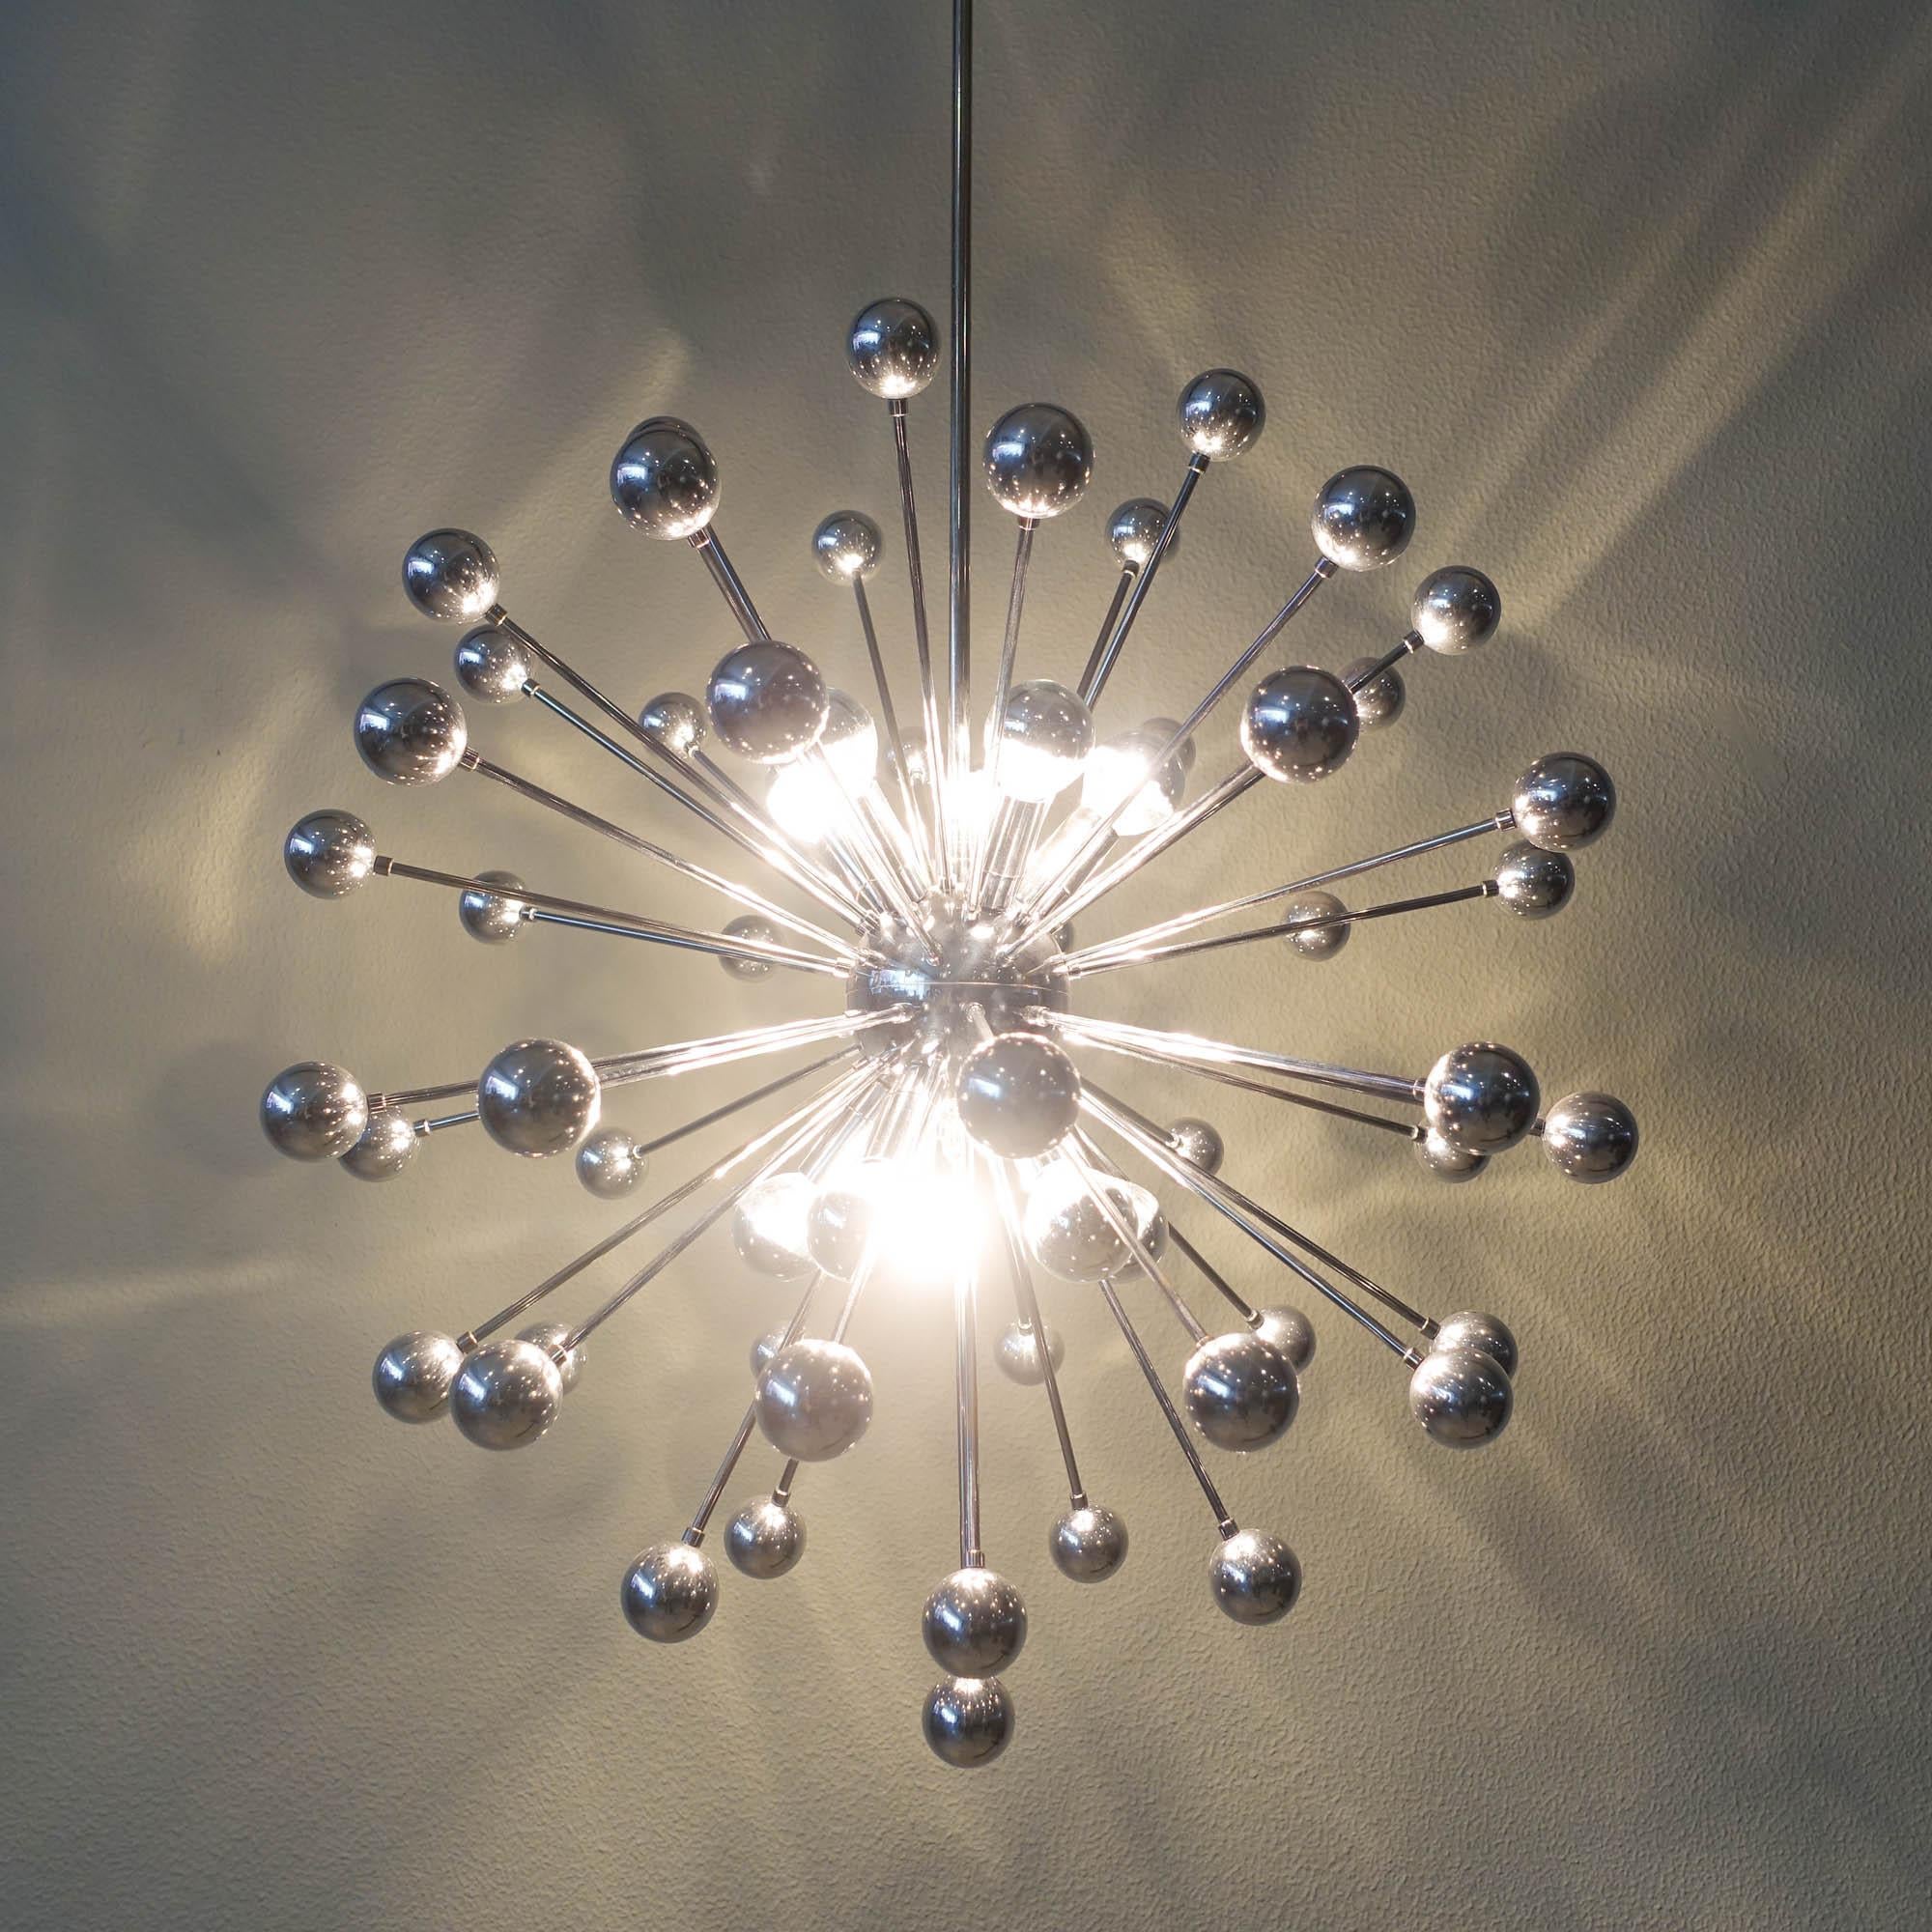 This ceiling lamp was designed and produced in Italy during the 1970's. It is a large chromed Sputnik chandelier with 10 light points. With a chrome globe in the middle were chromed metal rods are attached and point in every direction with chromed